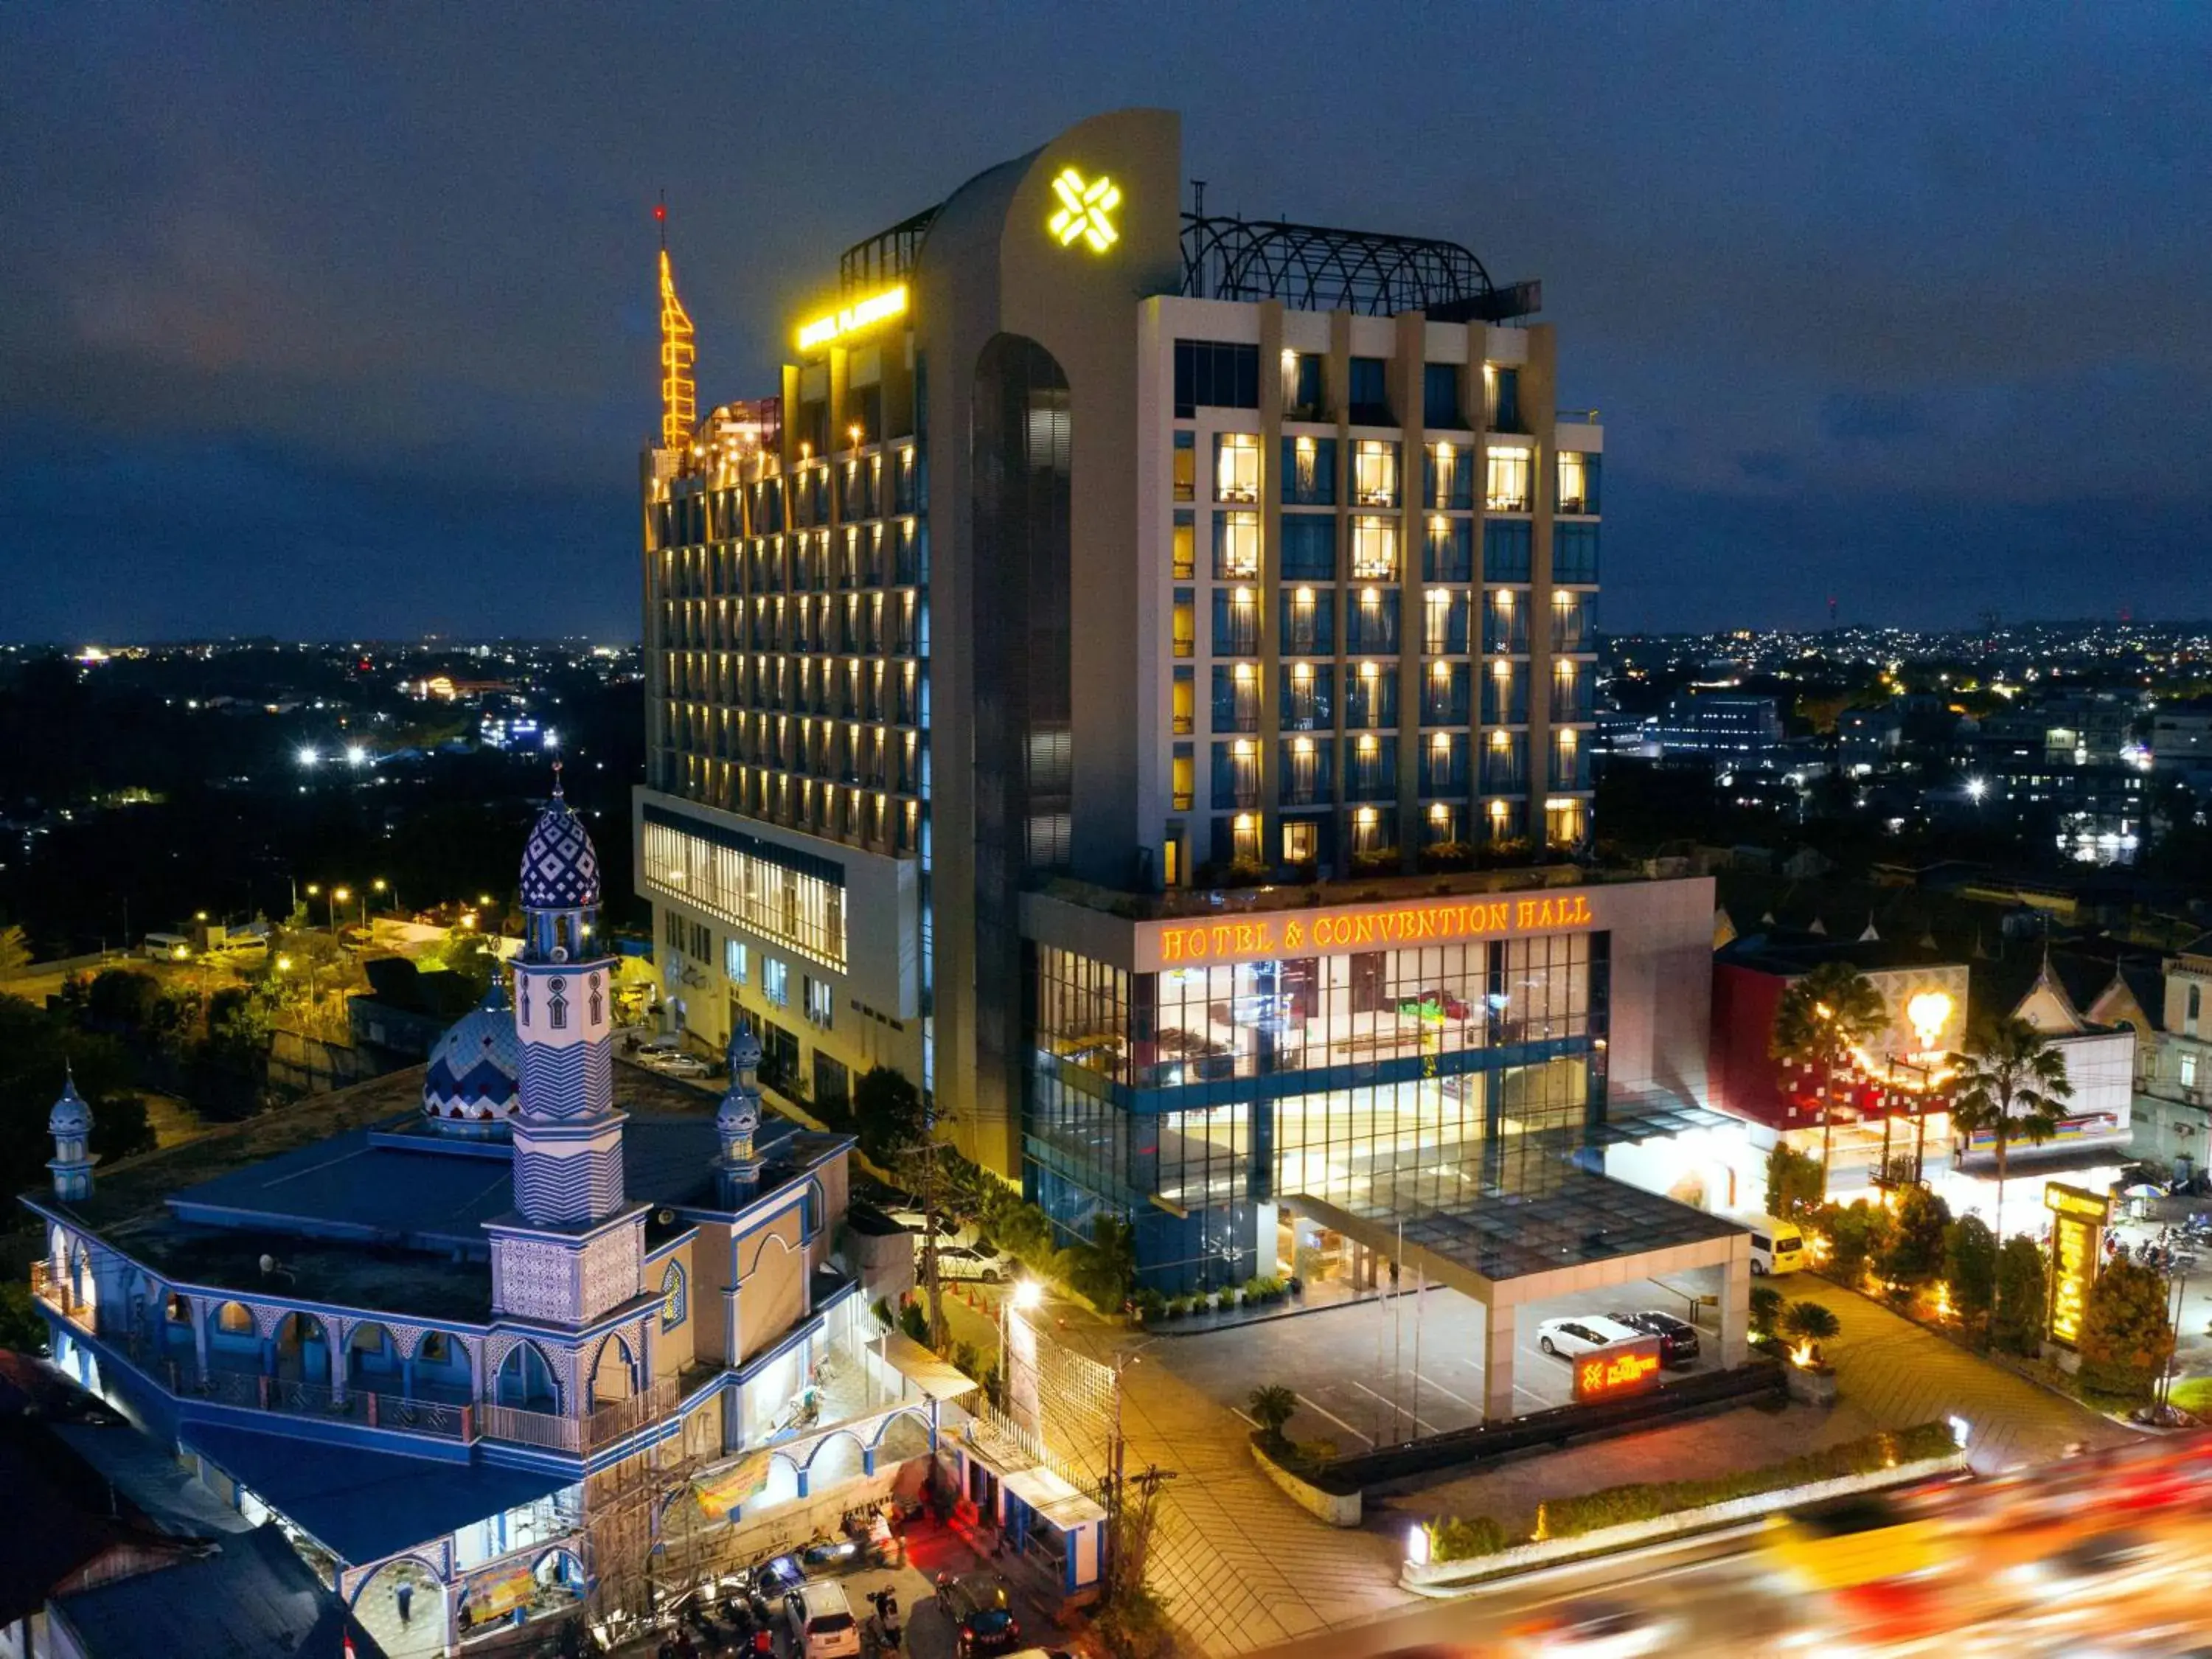 Property Building in Platinum Hotel & Convention Hall Balikpapan